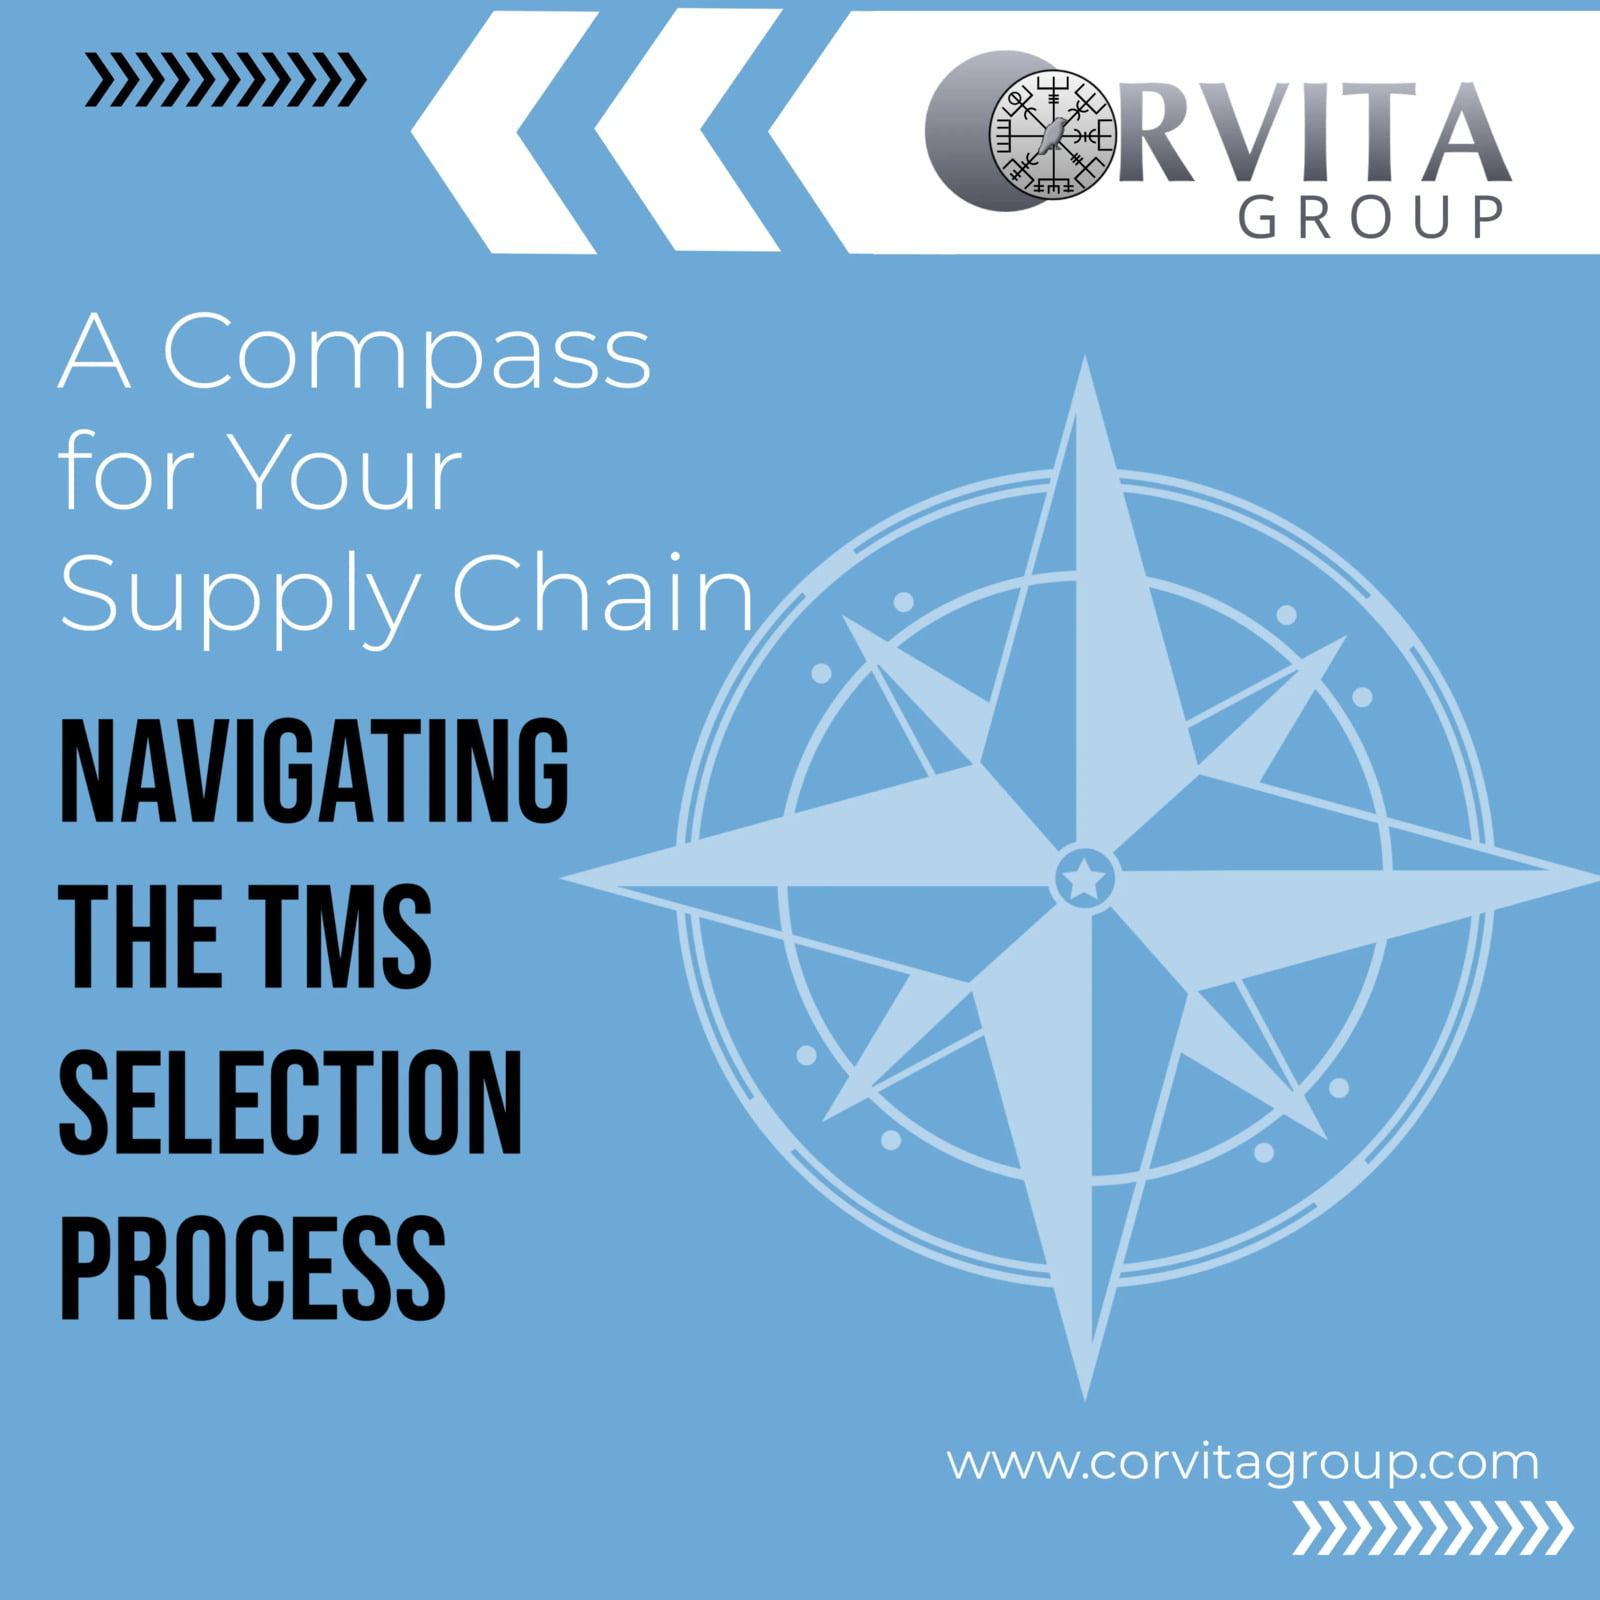 A Compass for Your Supply Chain: Navigating the TMS Selection Process